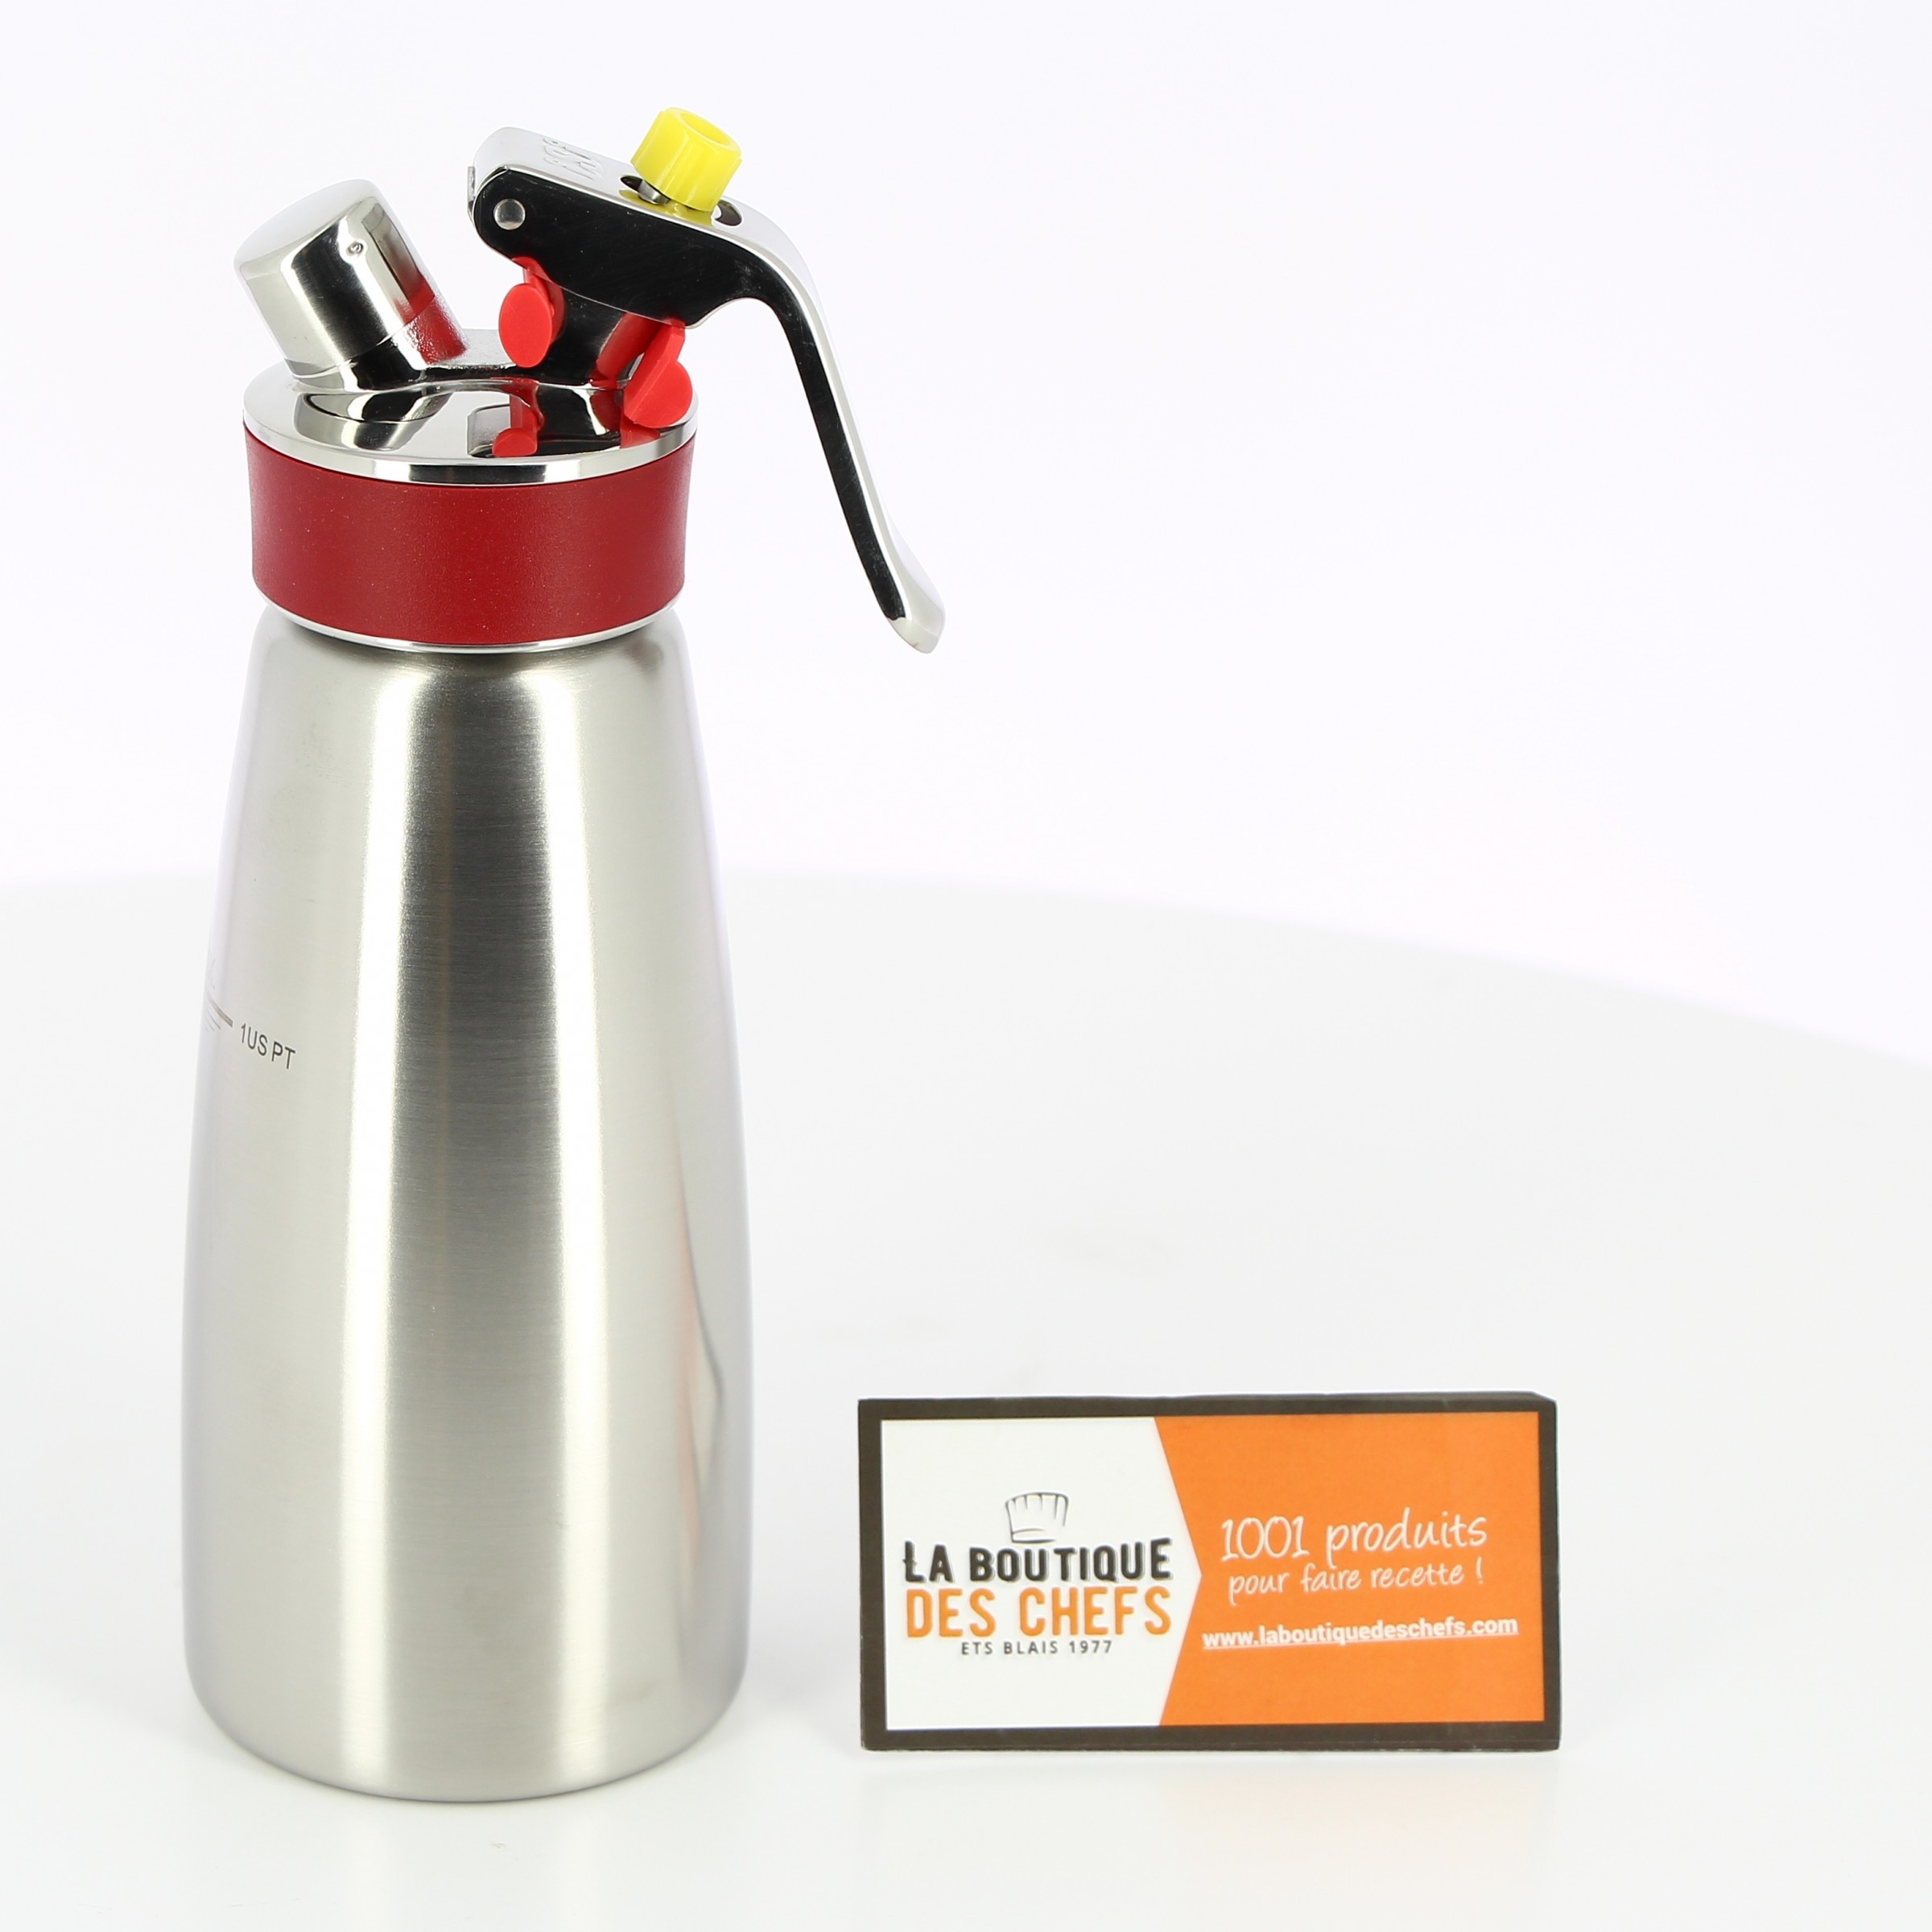 Siphon Thermo Whip (0,5 litre) - iSi - Meilleur du Chef